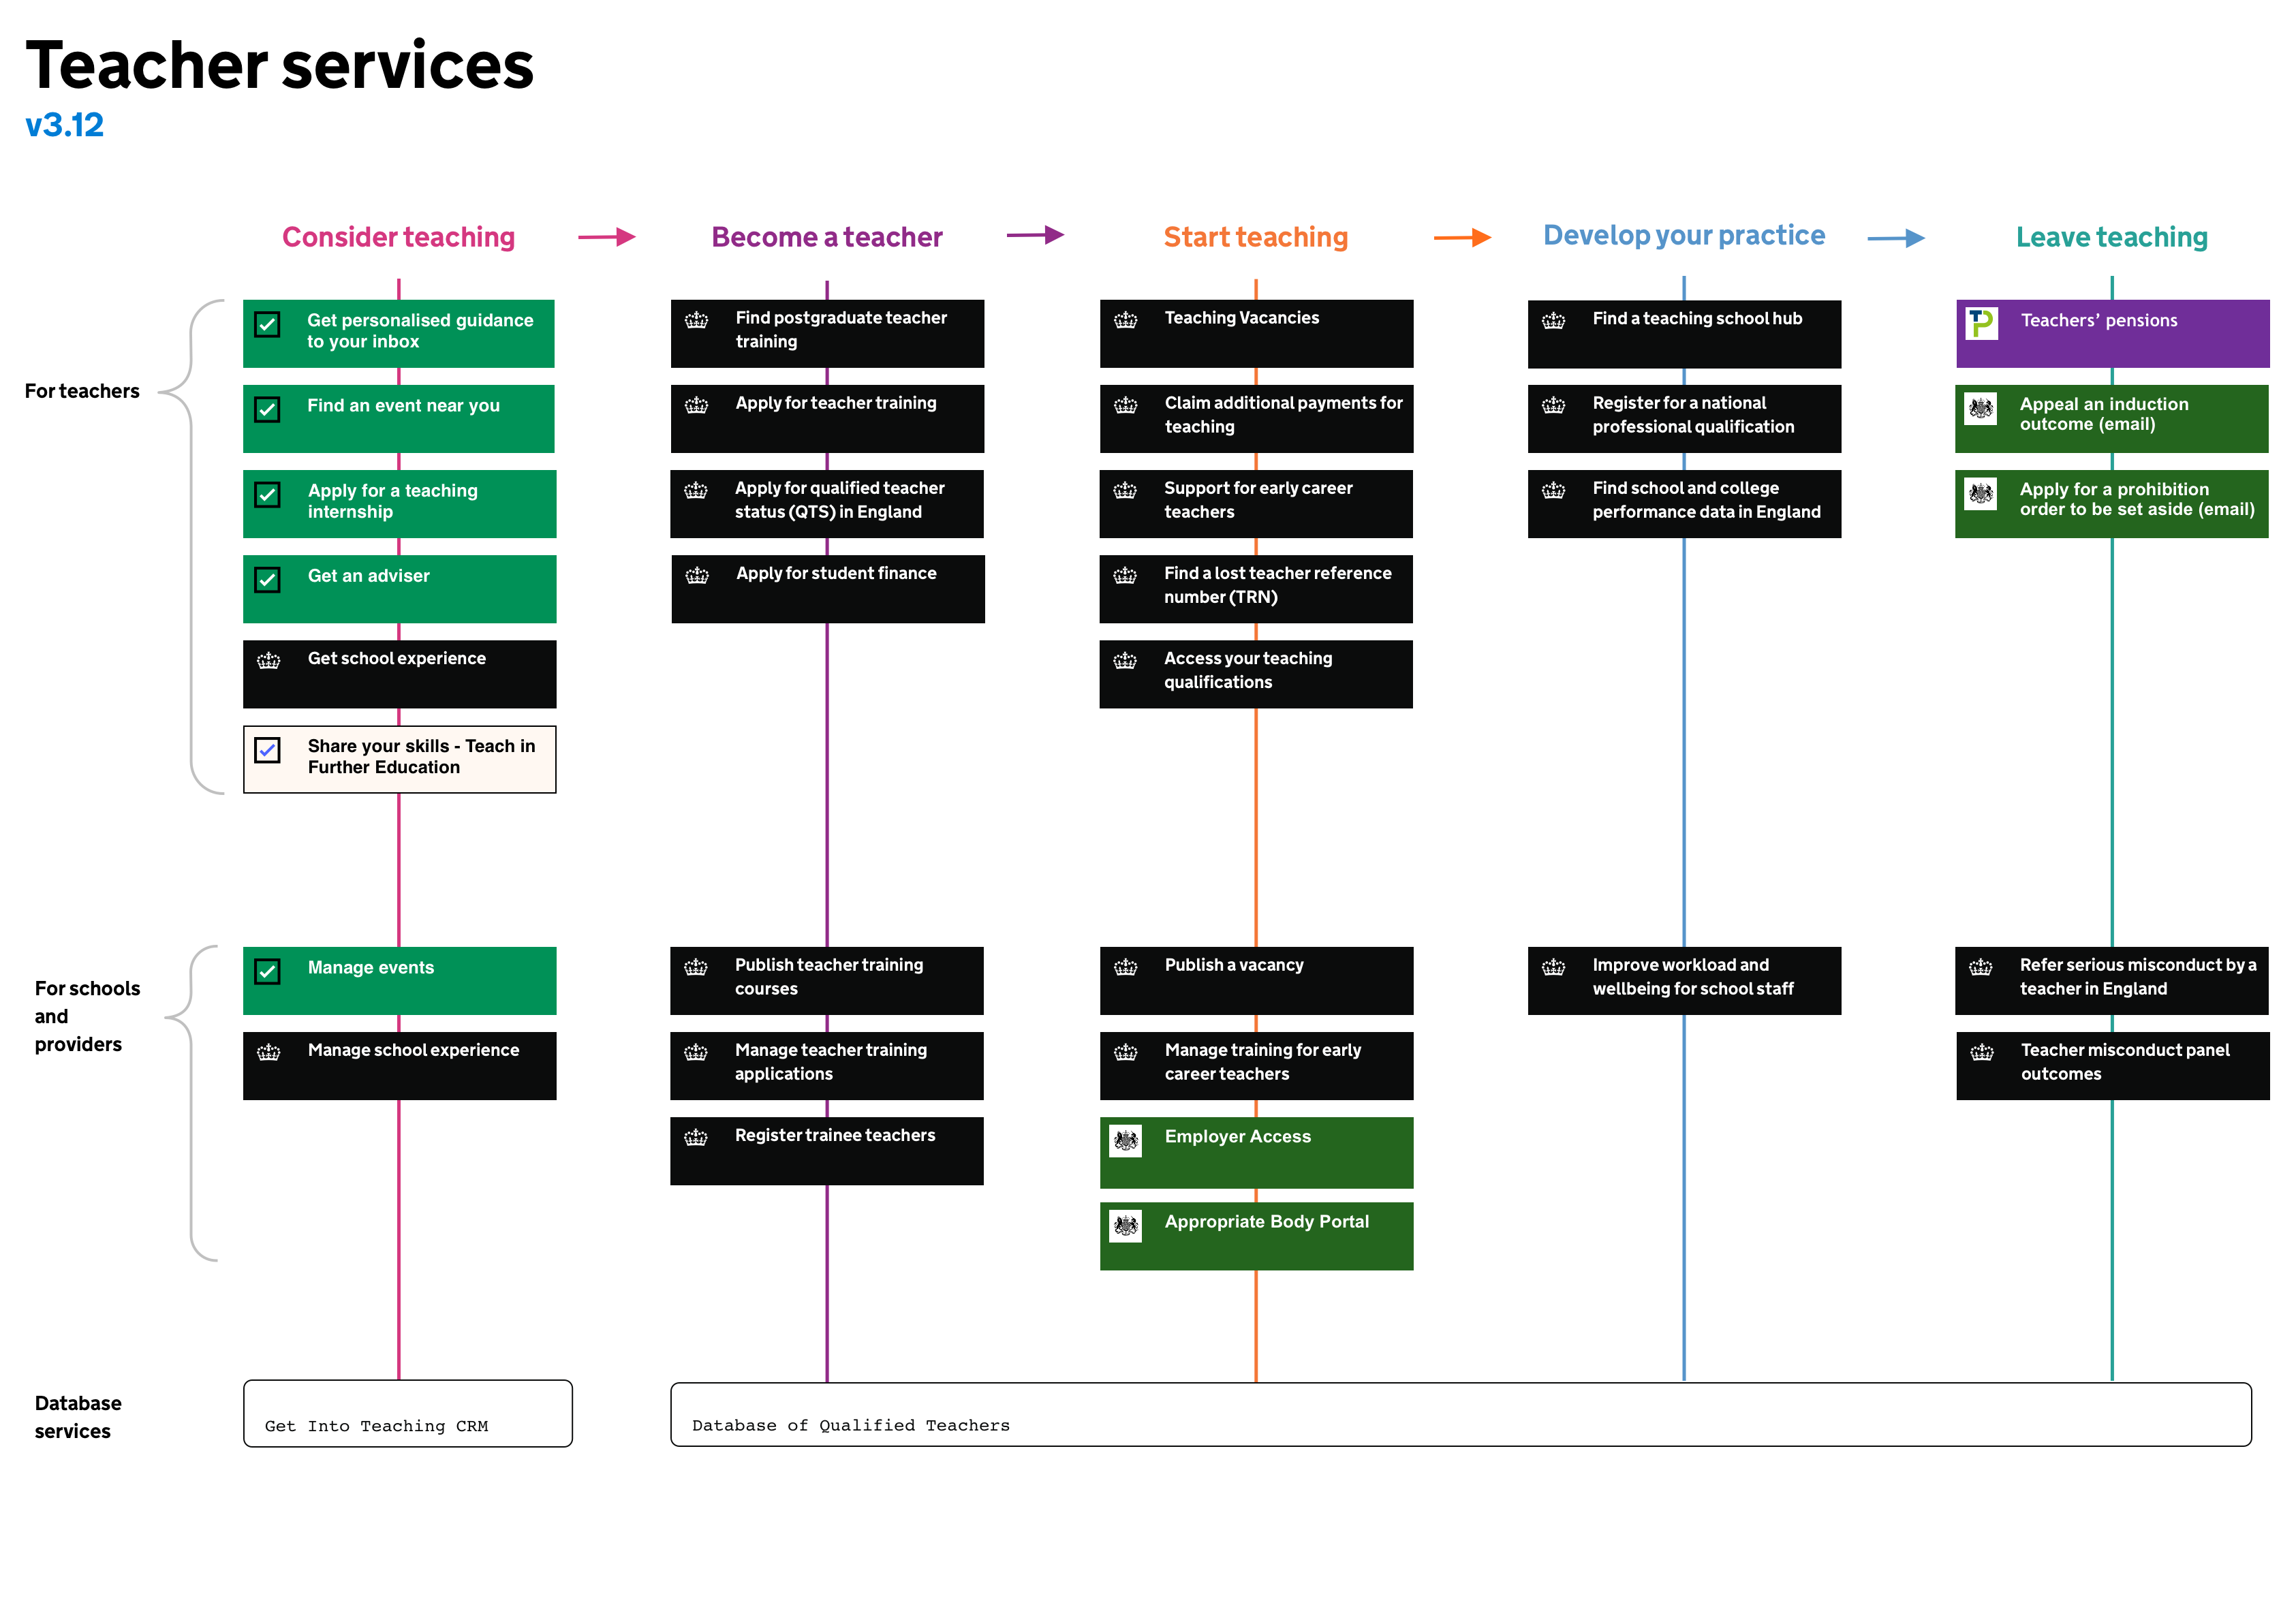 Diagram showing a list of services arranged into 5 columns with the headings: consider teaching, become a teacher, start teaching, develop your practice and leave teaching. Full list of services below.